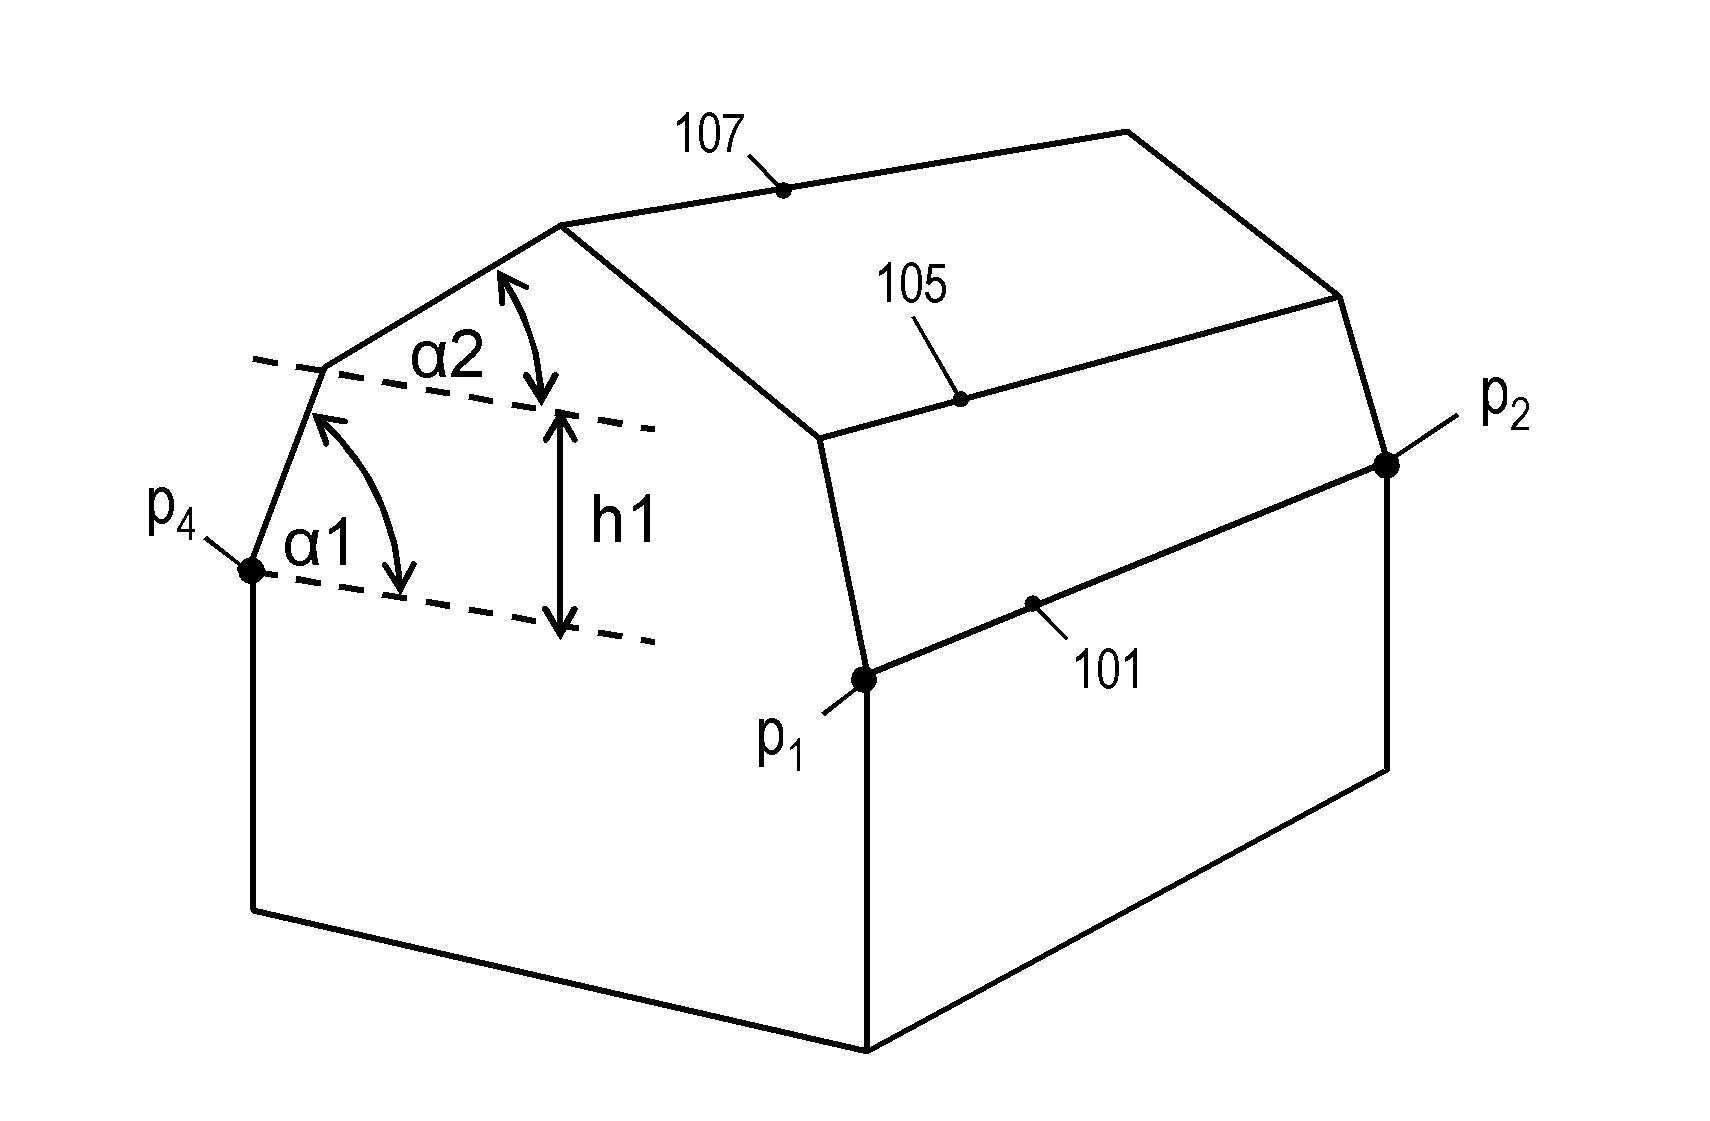 Navigation system for outputting a three-dimensional roof structure and generating a database